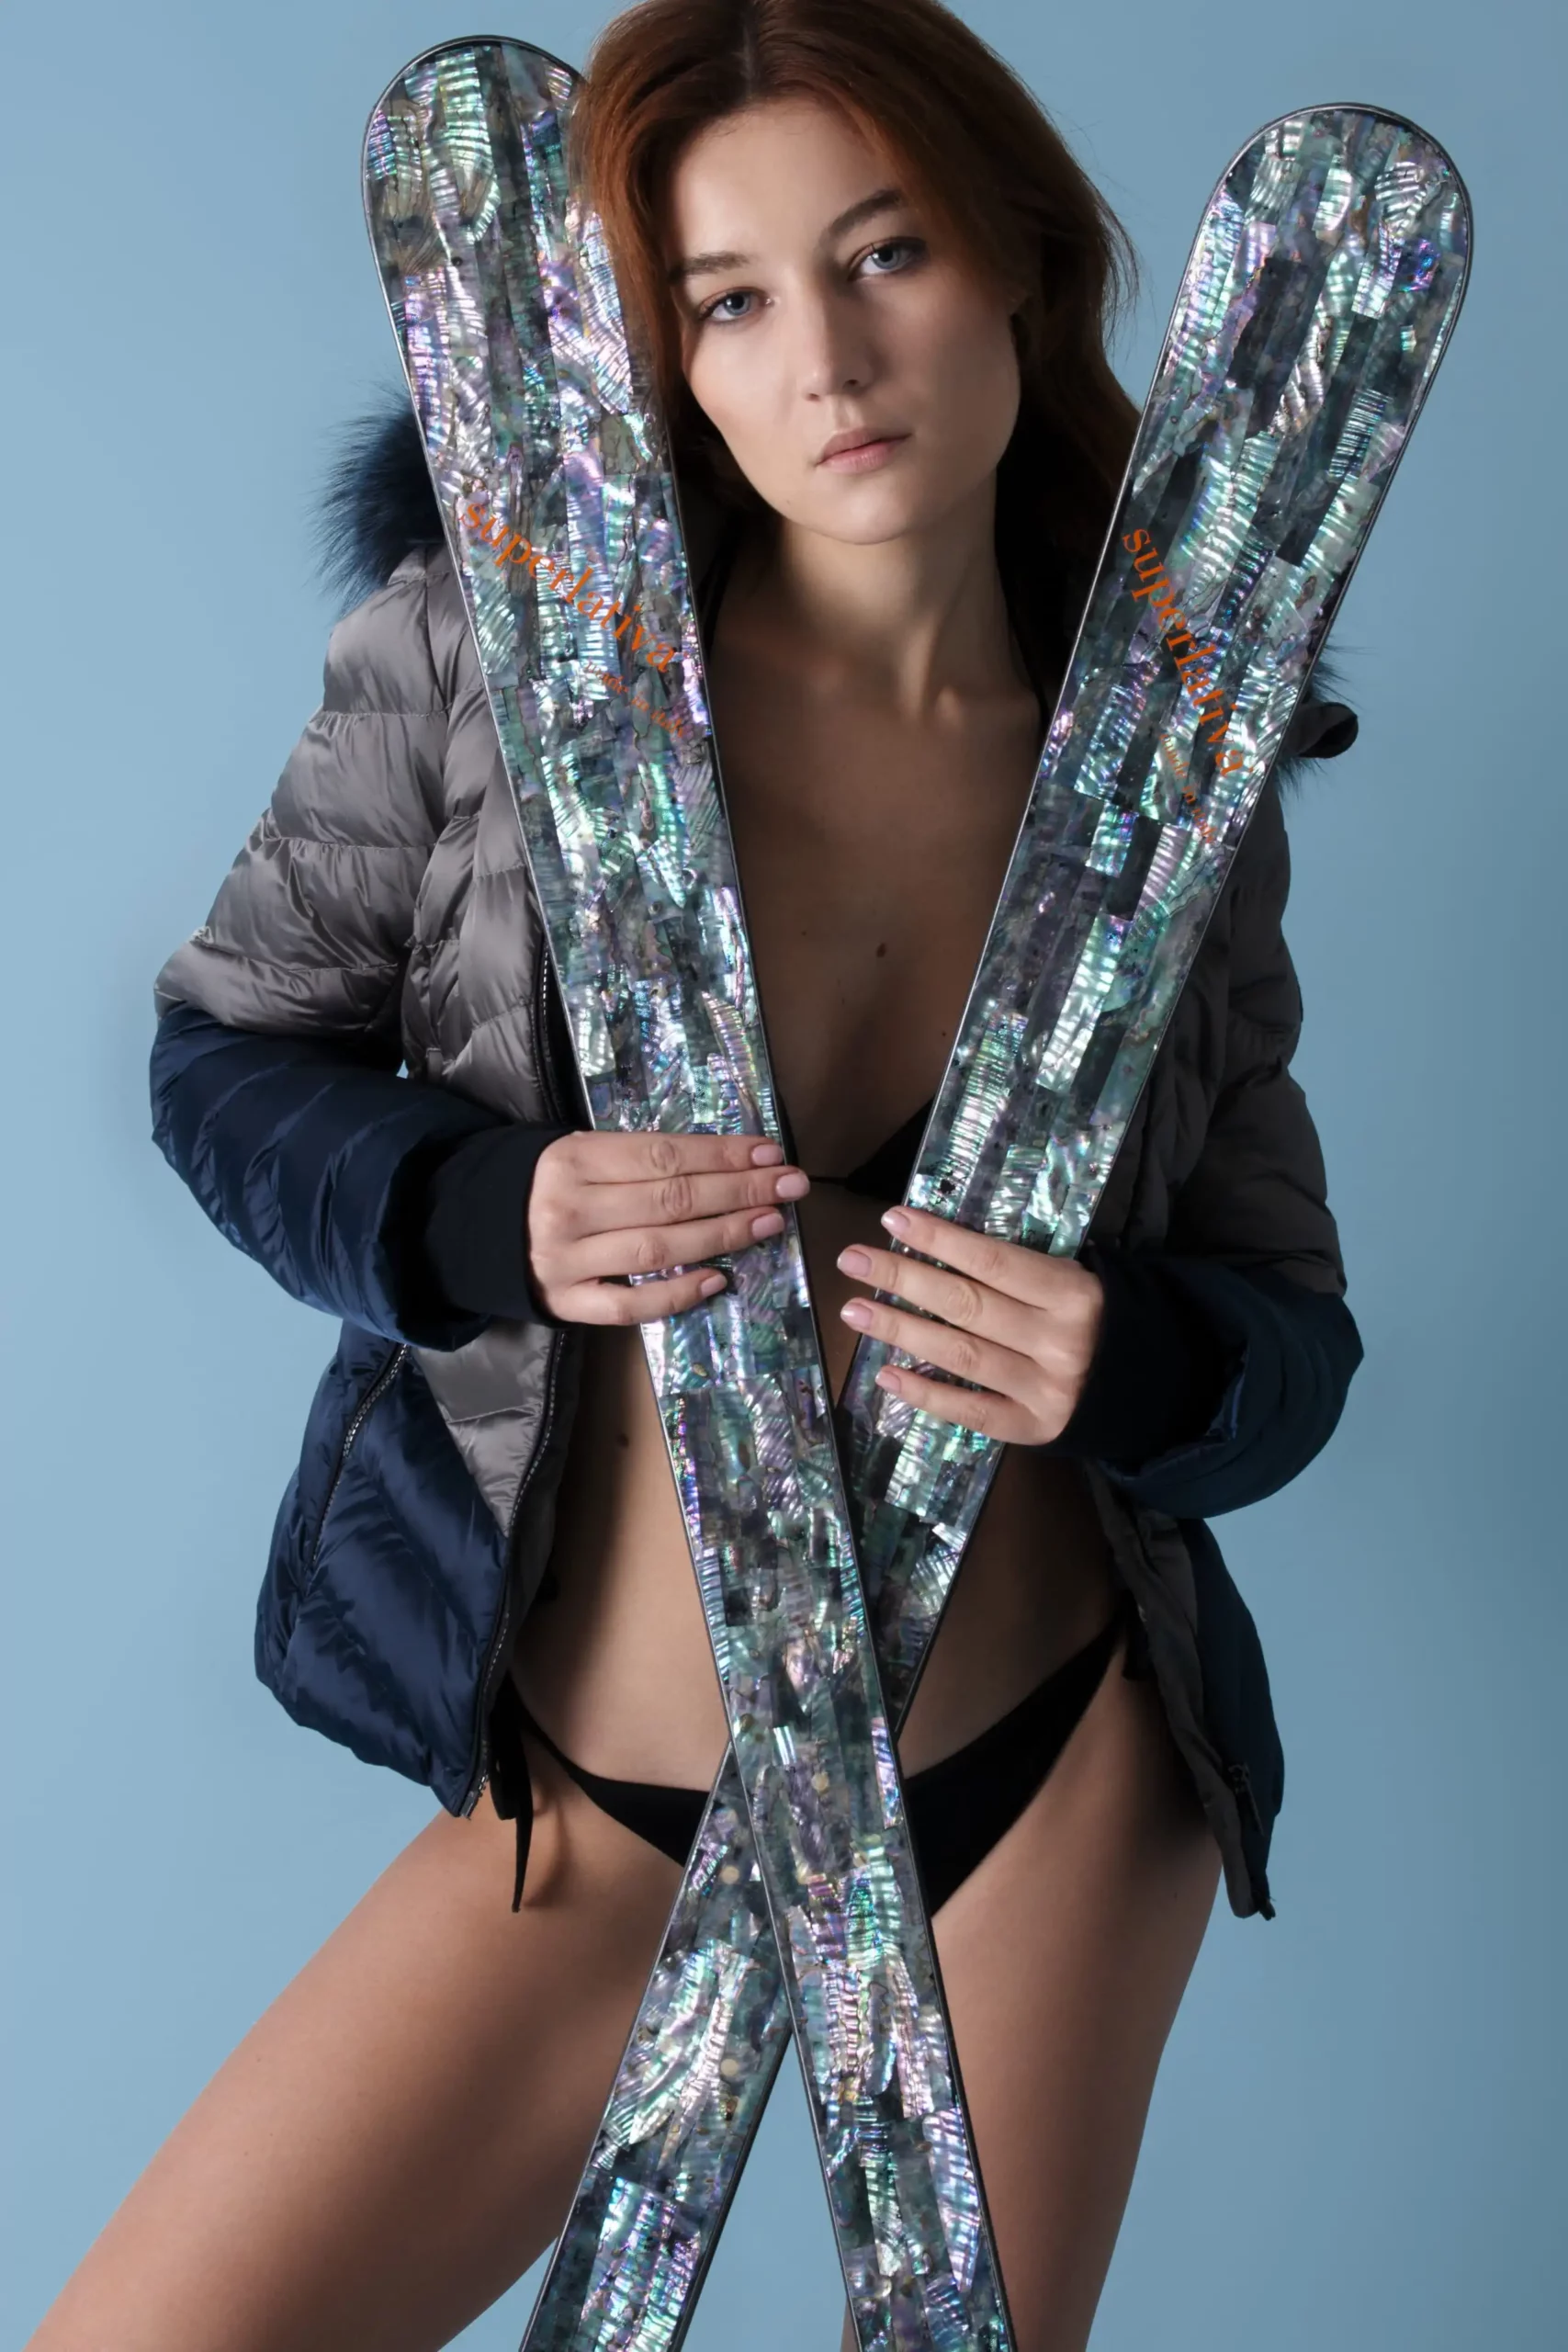 a model holding a pair of skis